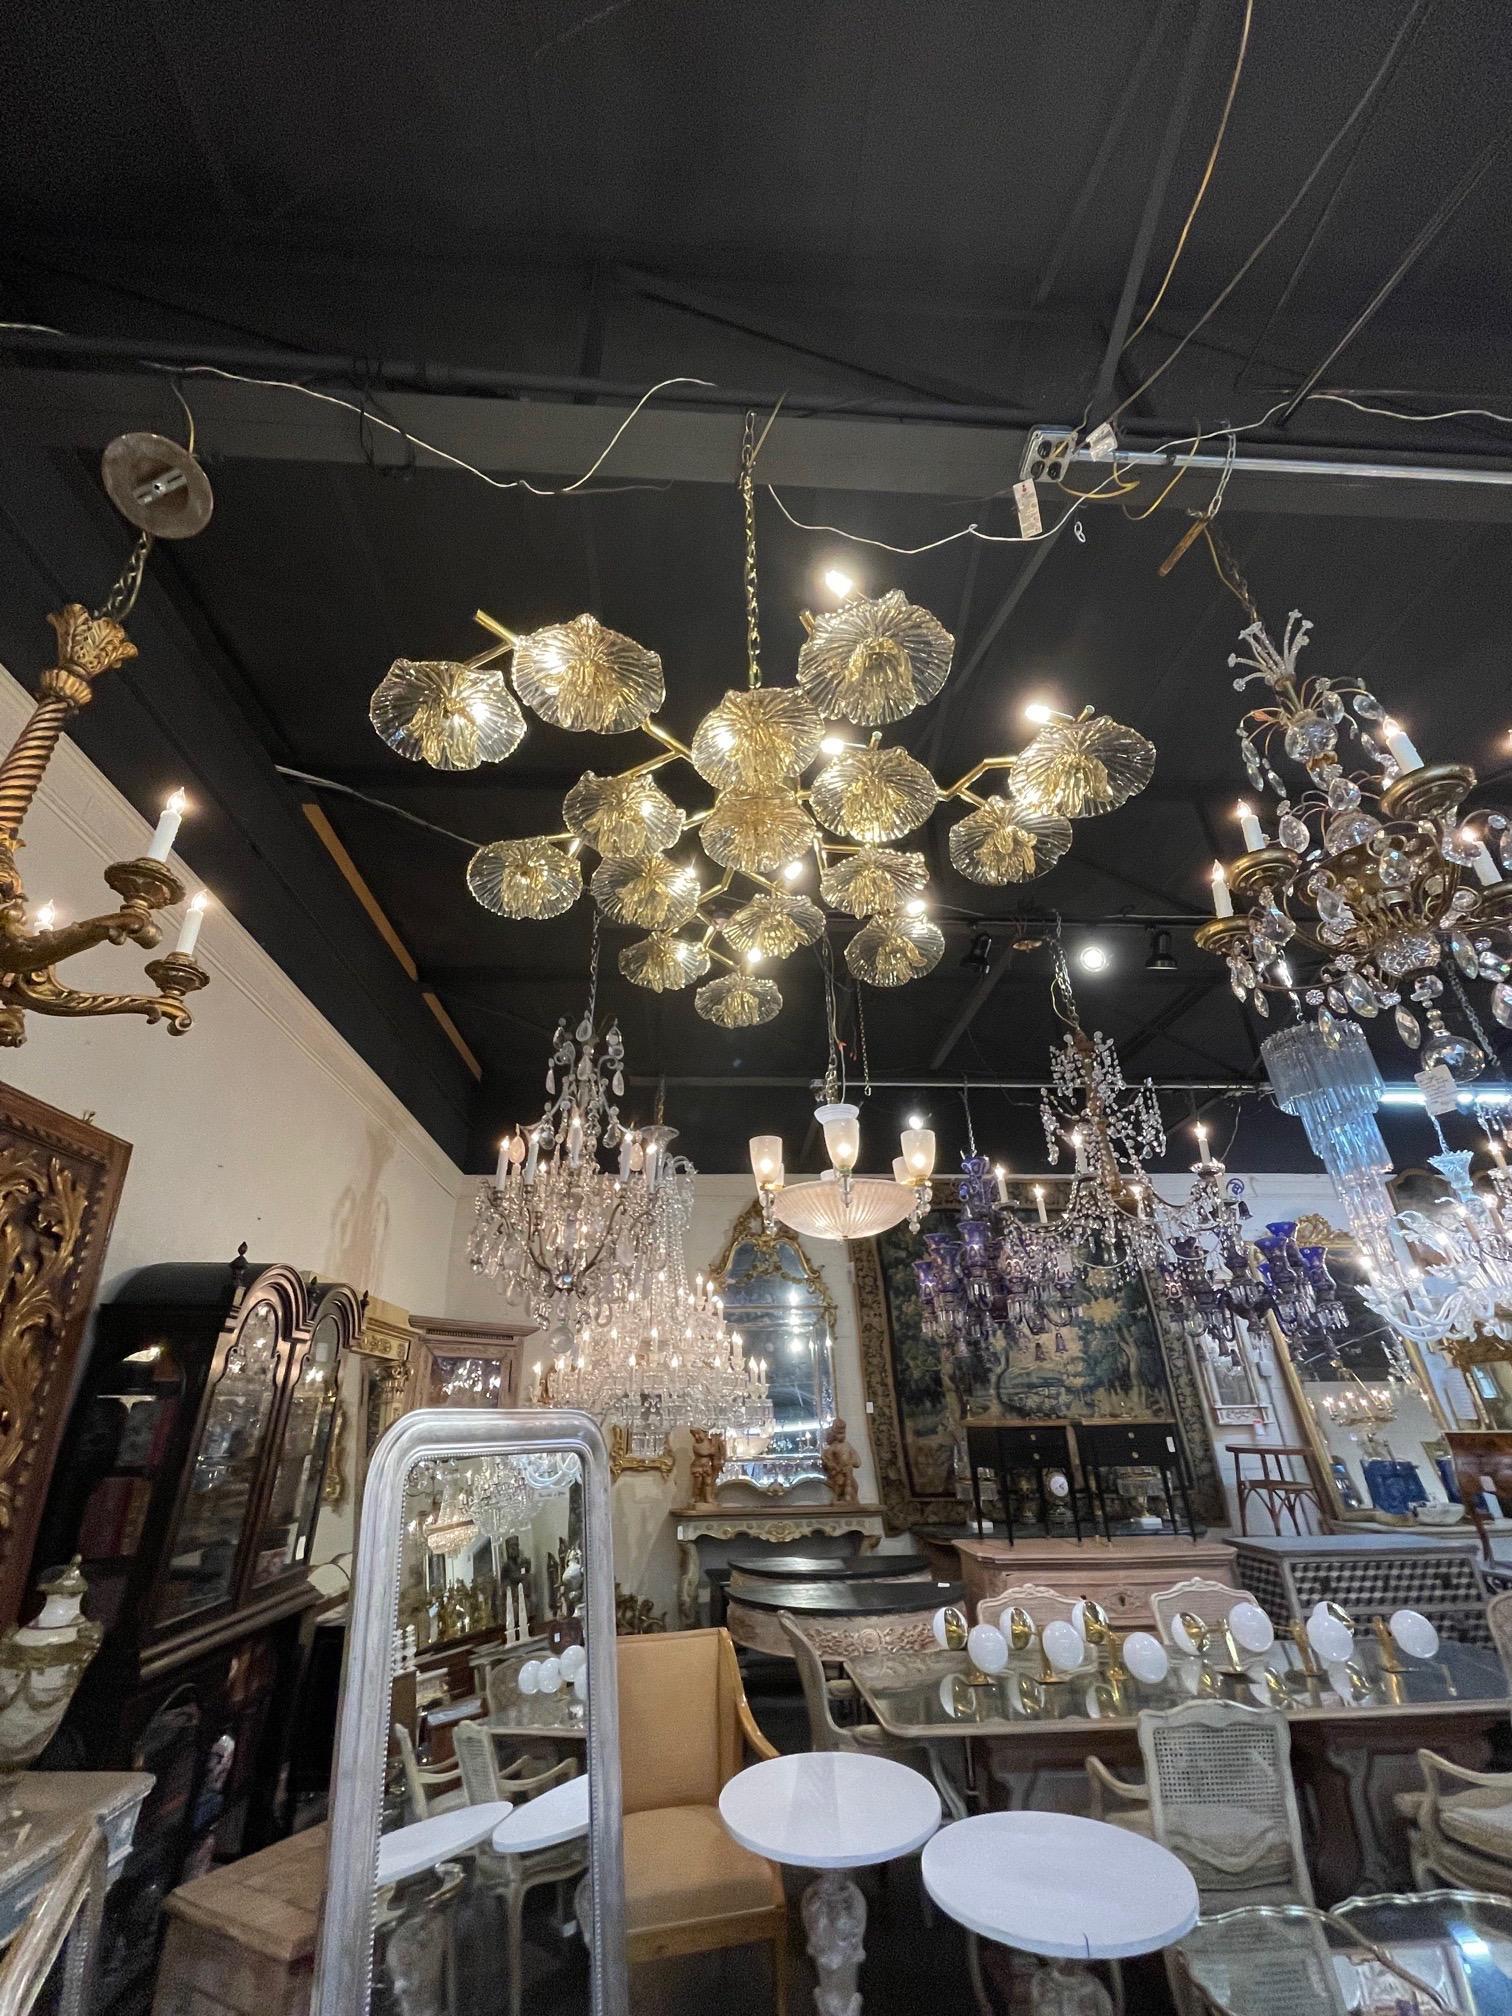 Exquisite Murano glass and brass flower form flush mount chandelier. Featuring beautiful glistening gold colored flowers on a brass base. Amazing! A true work of art.